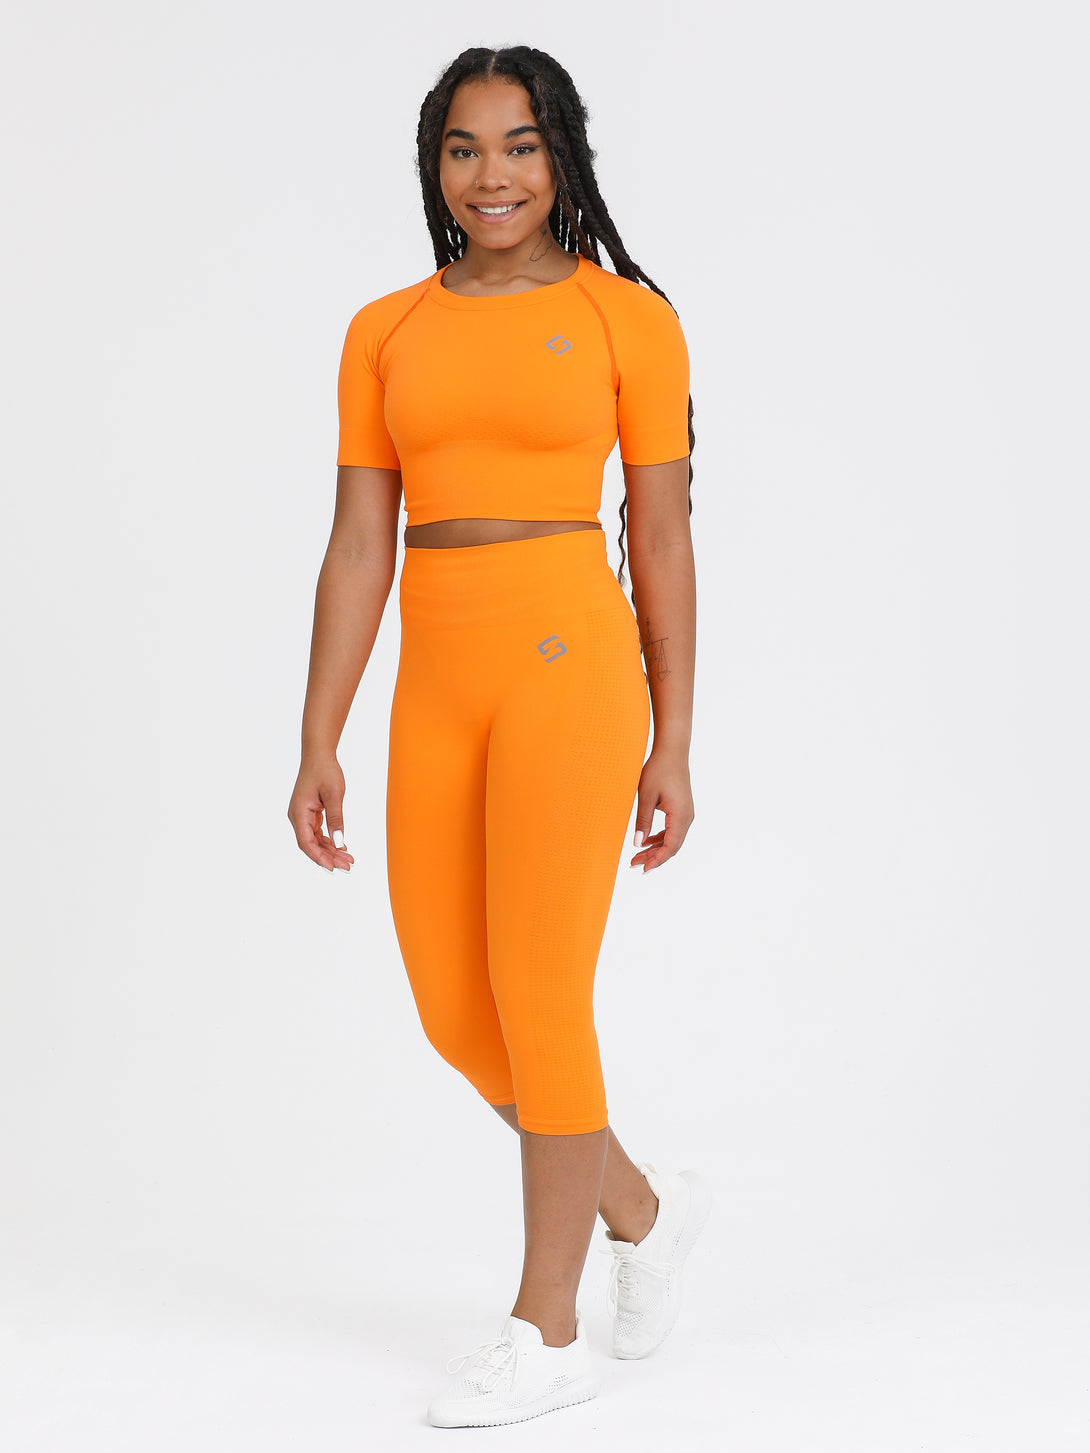 A Woman Wearing Orange Color The Main Short Sleeve Crop Top